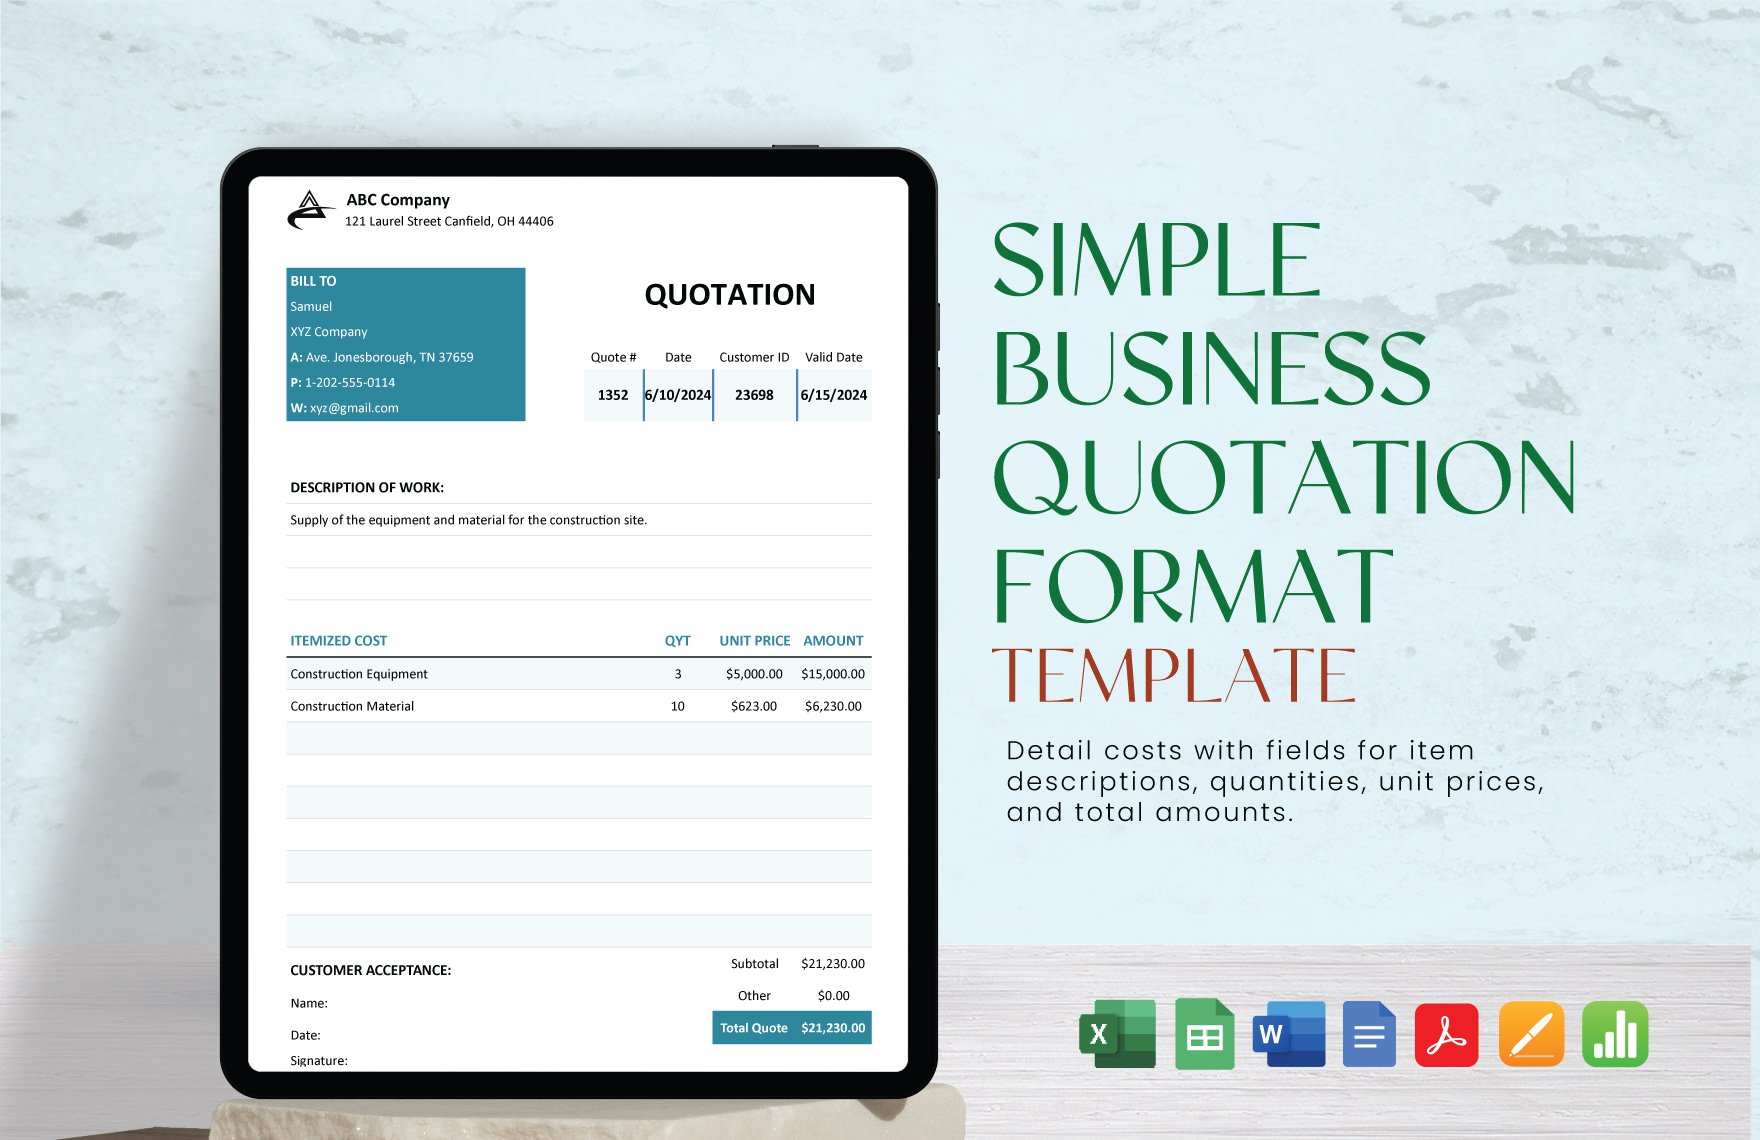 Simple Business Quotation Format Template in Word, Google Docs, Excel, PDF, Google Sheets, Apple Pages, Apple Numbers